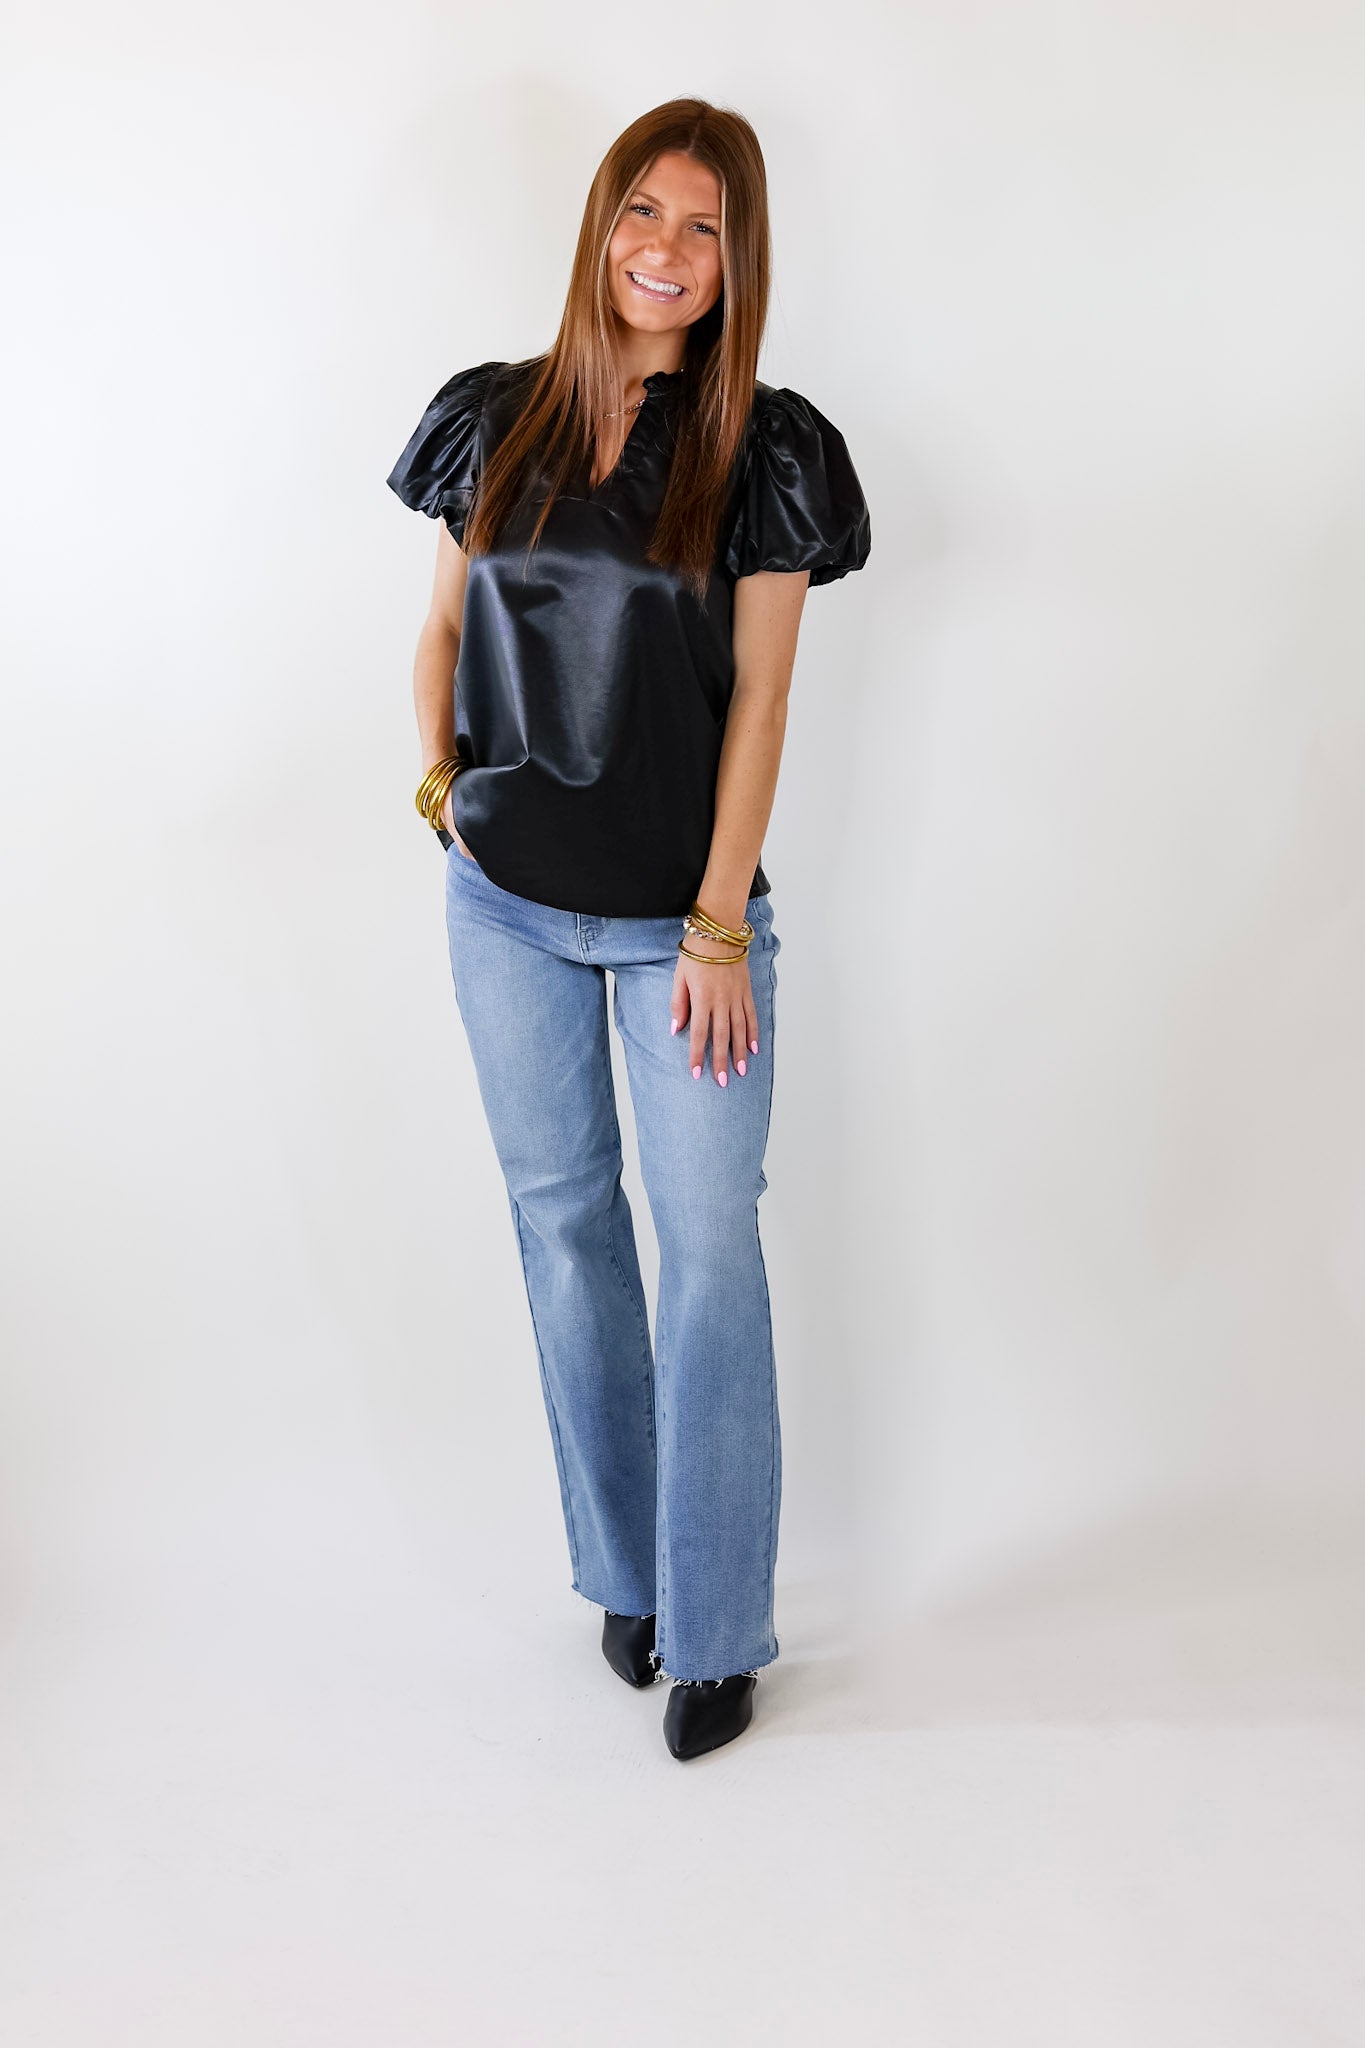 Replay The Night Faux Leather Top with Short Balloon Sleeves in Black - Giddy Up Glamour Boutique